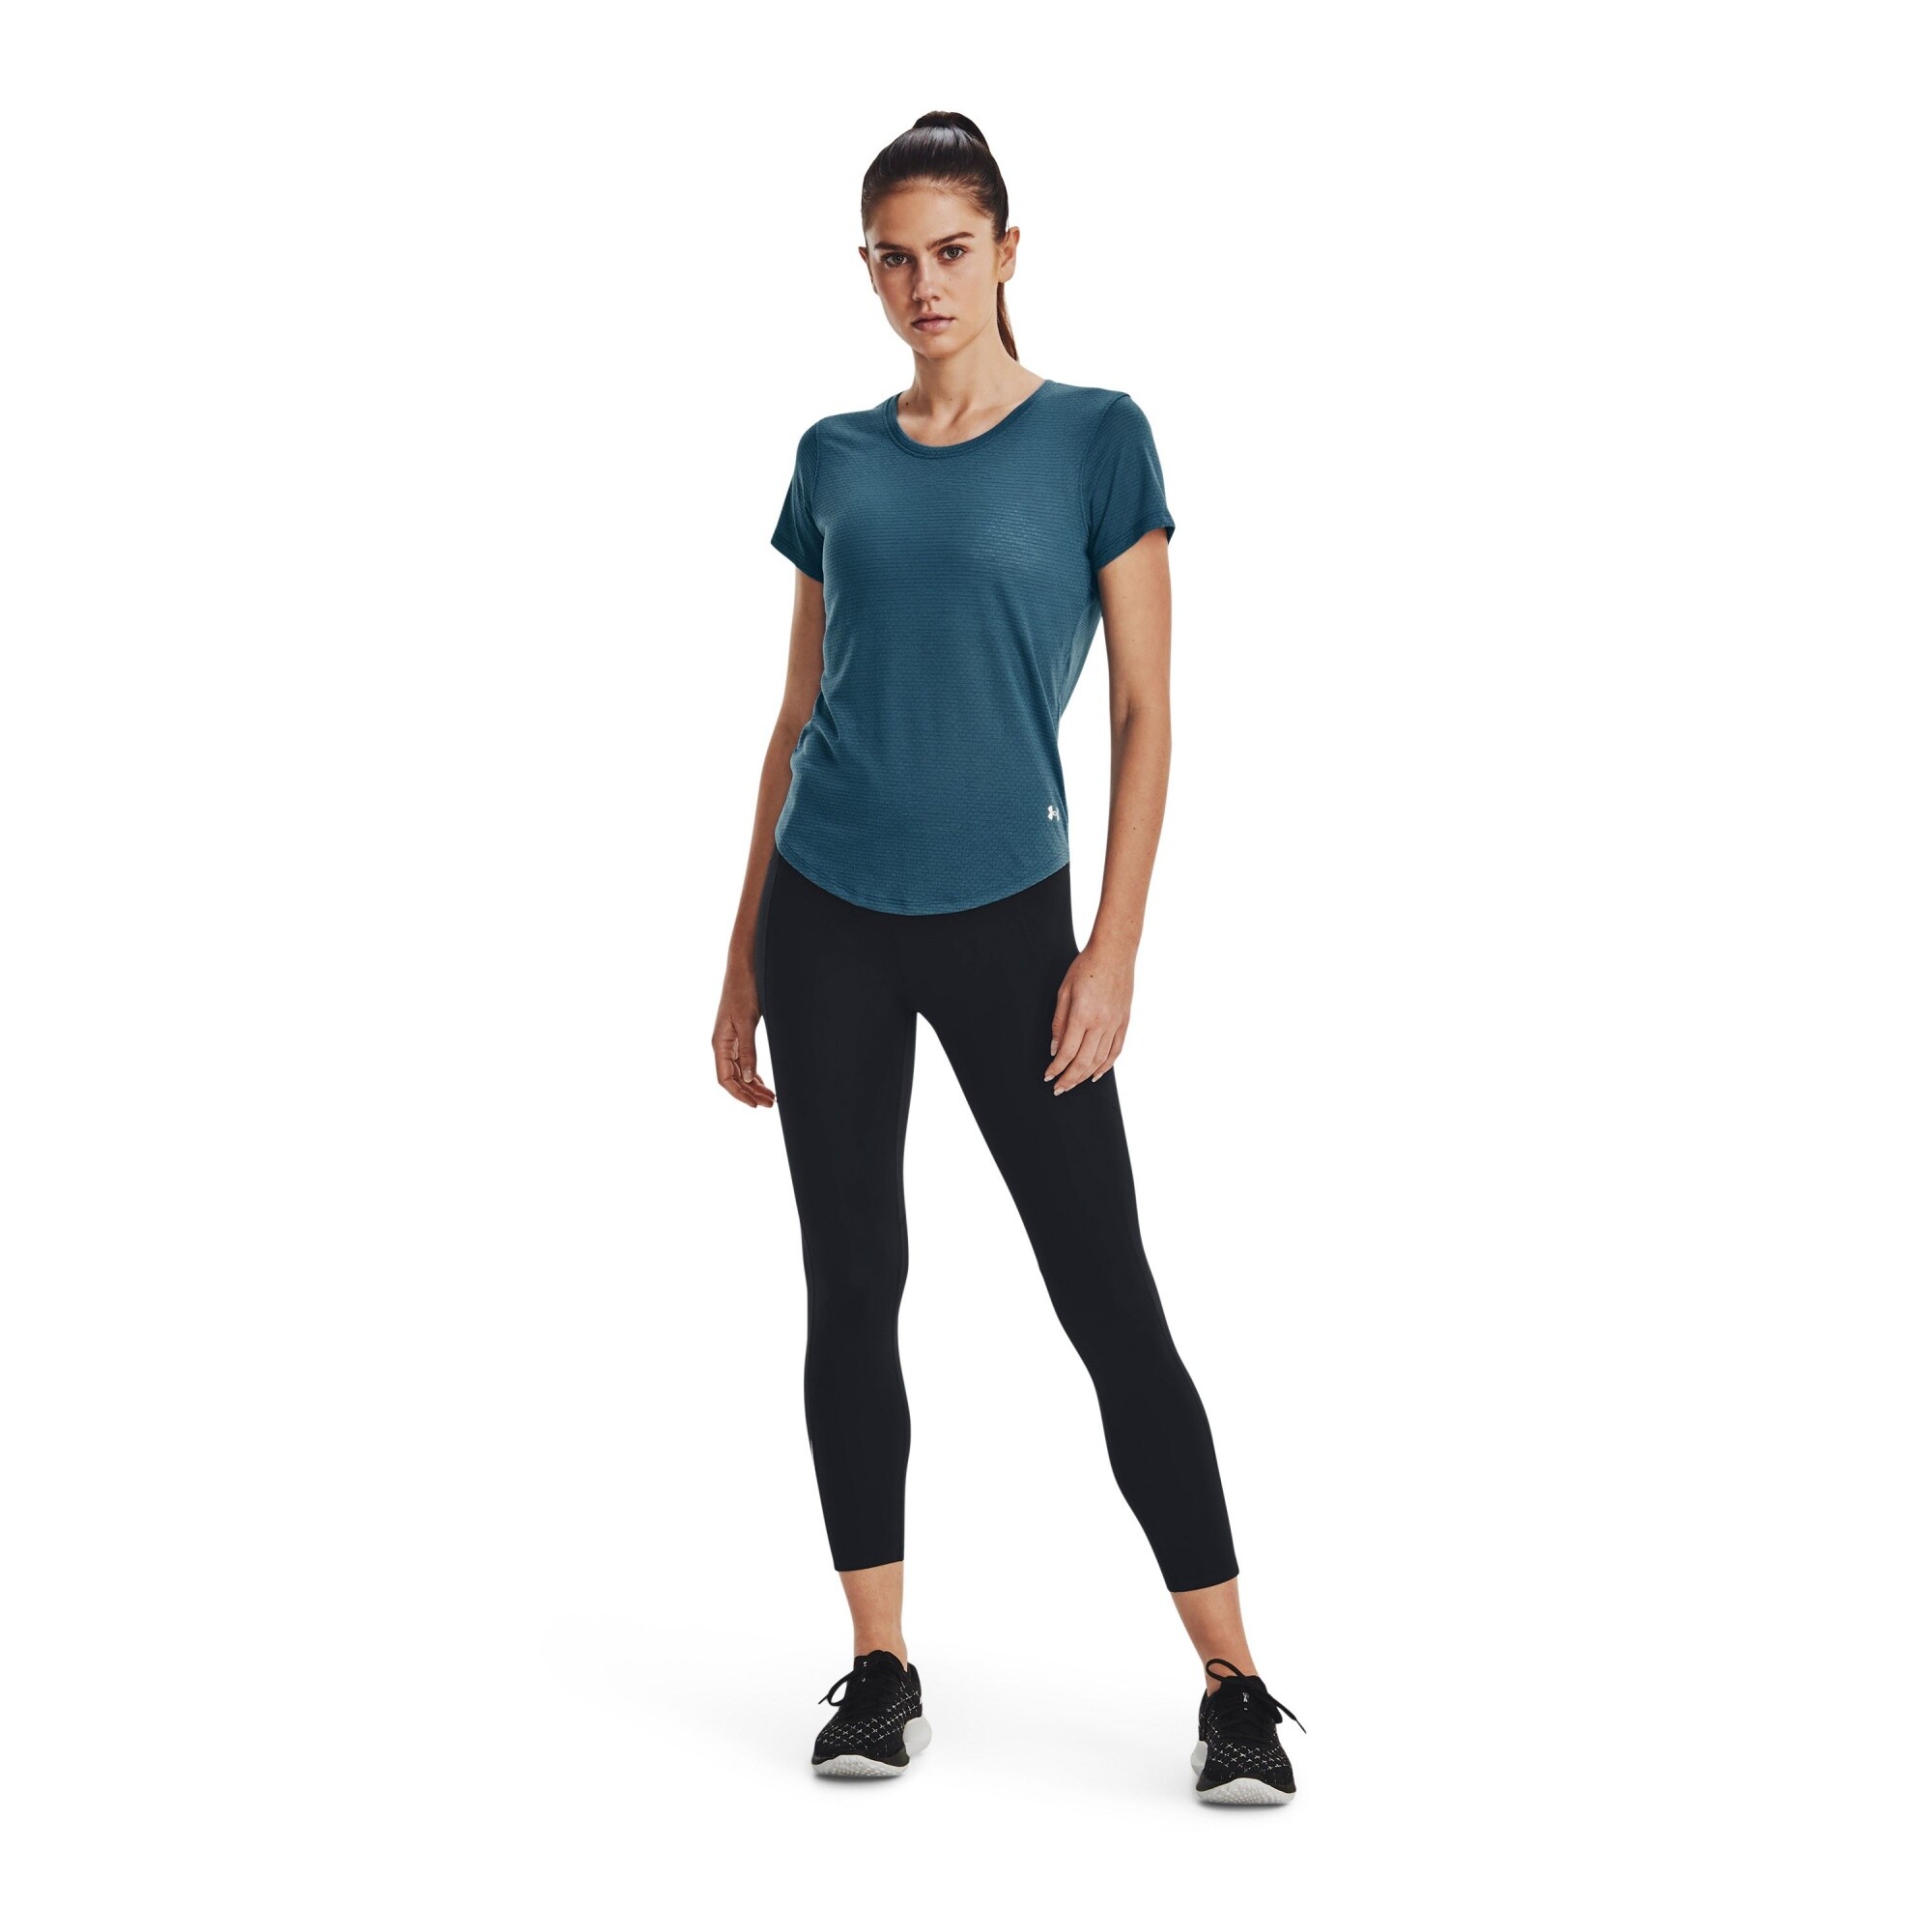 Remeras Under Armour  Remera Under Armour Mujer Streaker